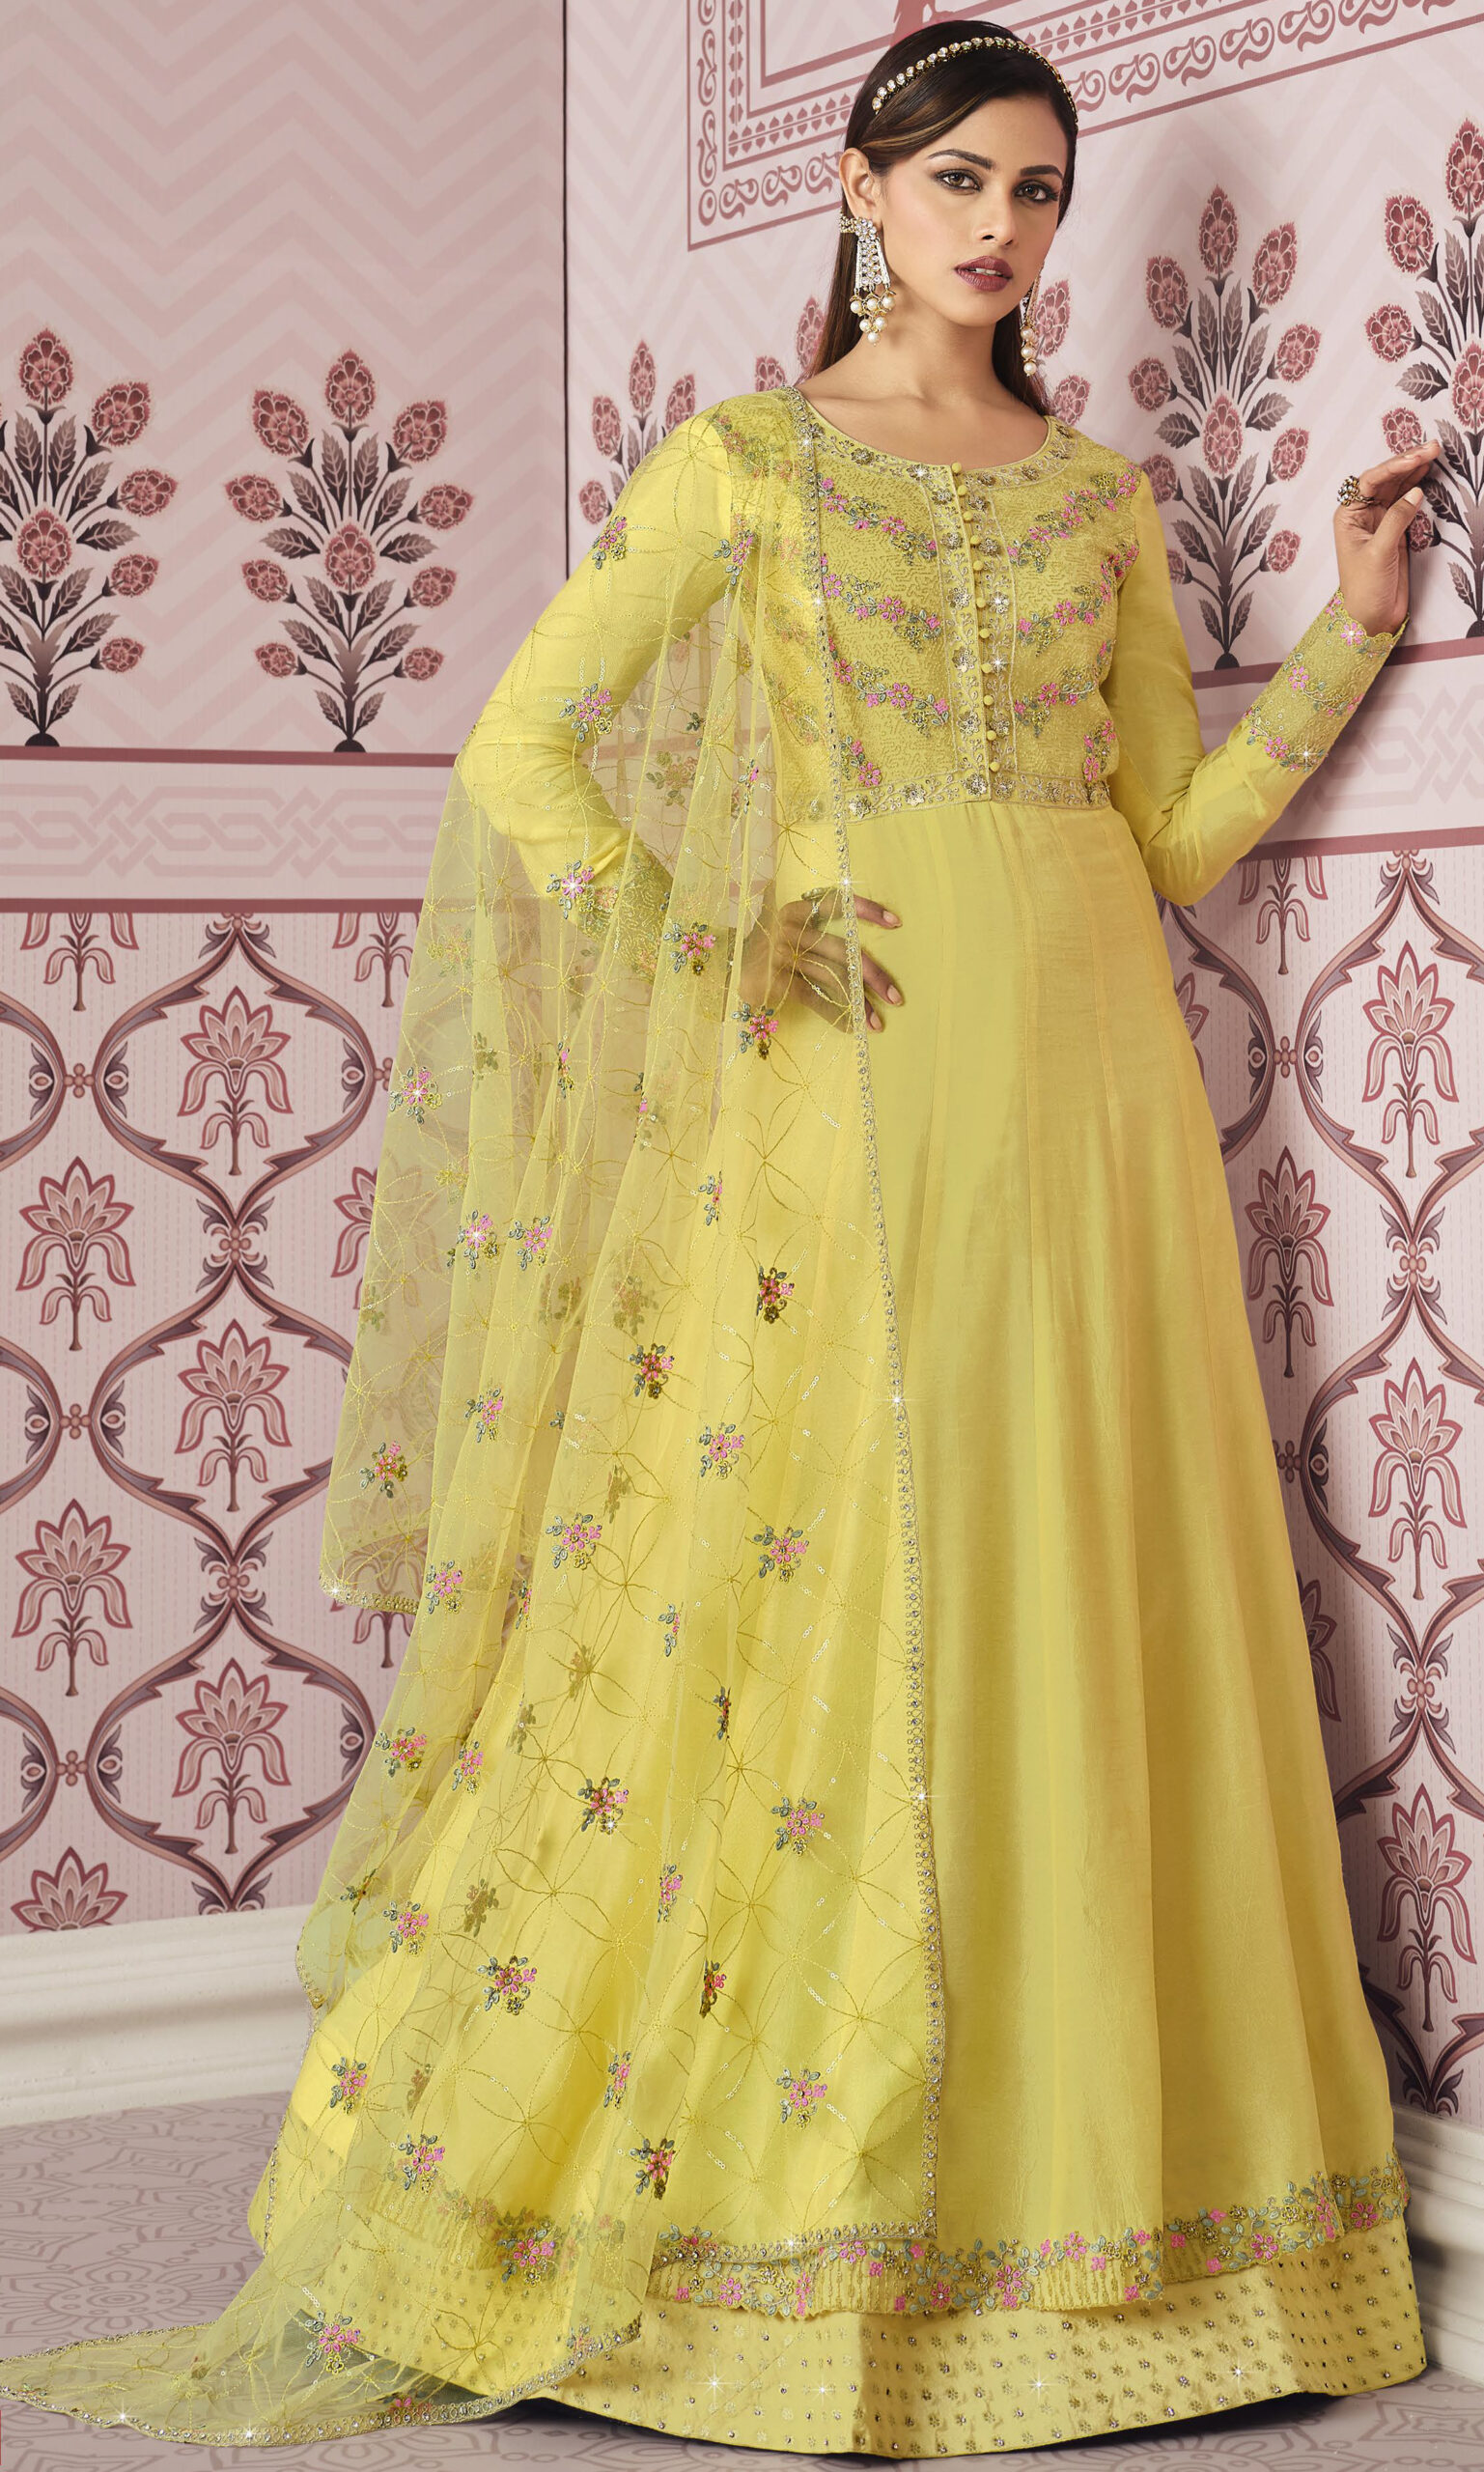 22 Haldi Ceremony Outfit Ideas for Brides, Girls & Guests